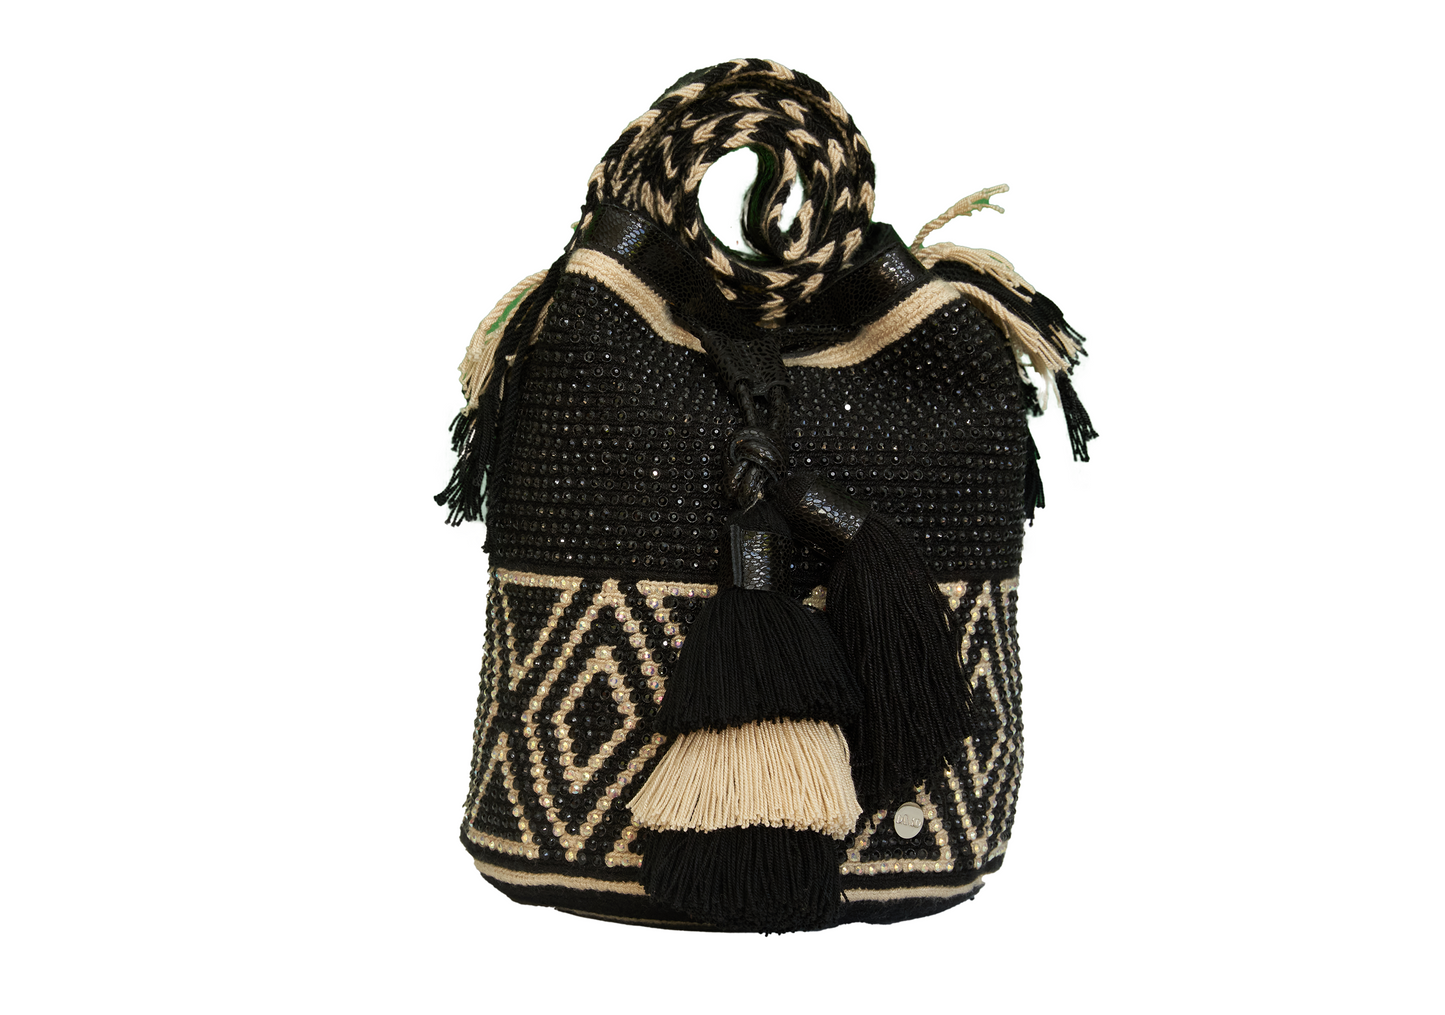 Black and White Leather Crochet Bag with Gems. The wayuu bag also has 2 tassels